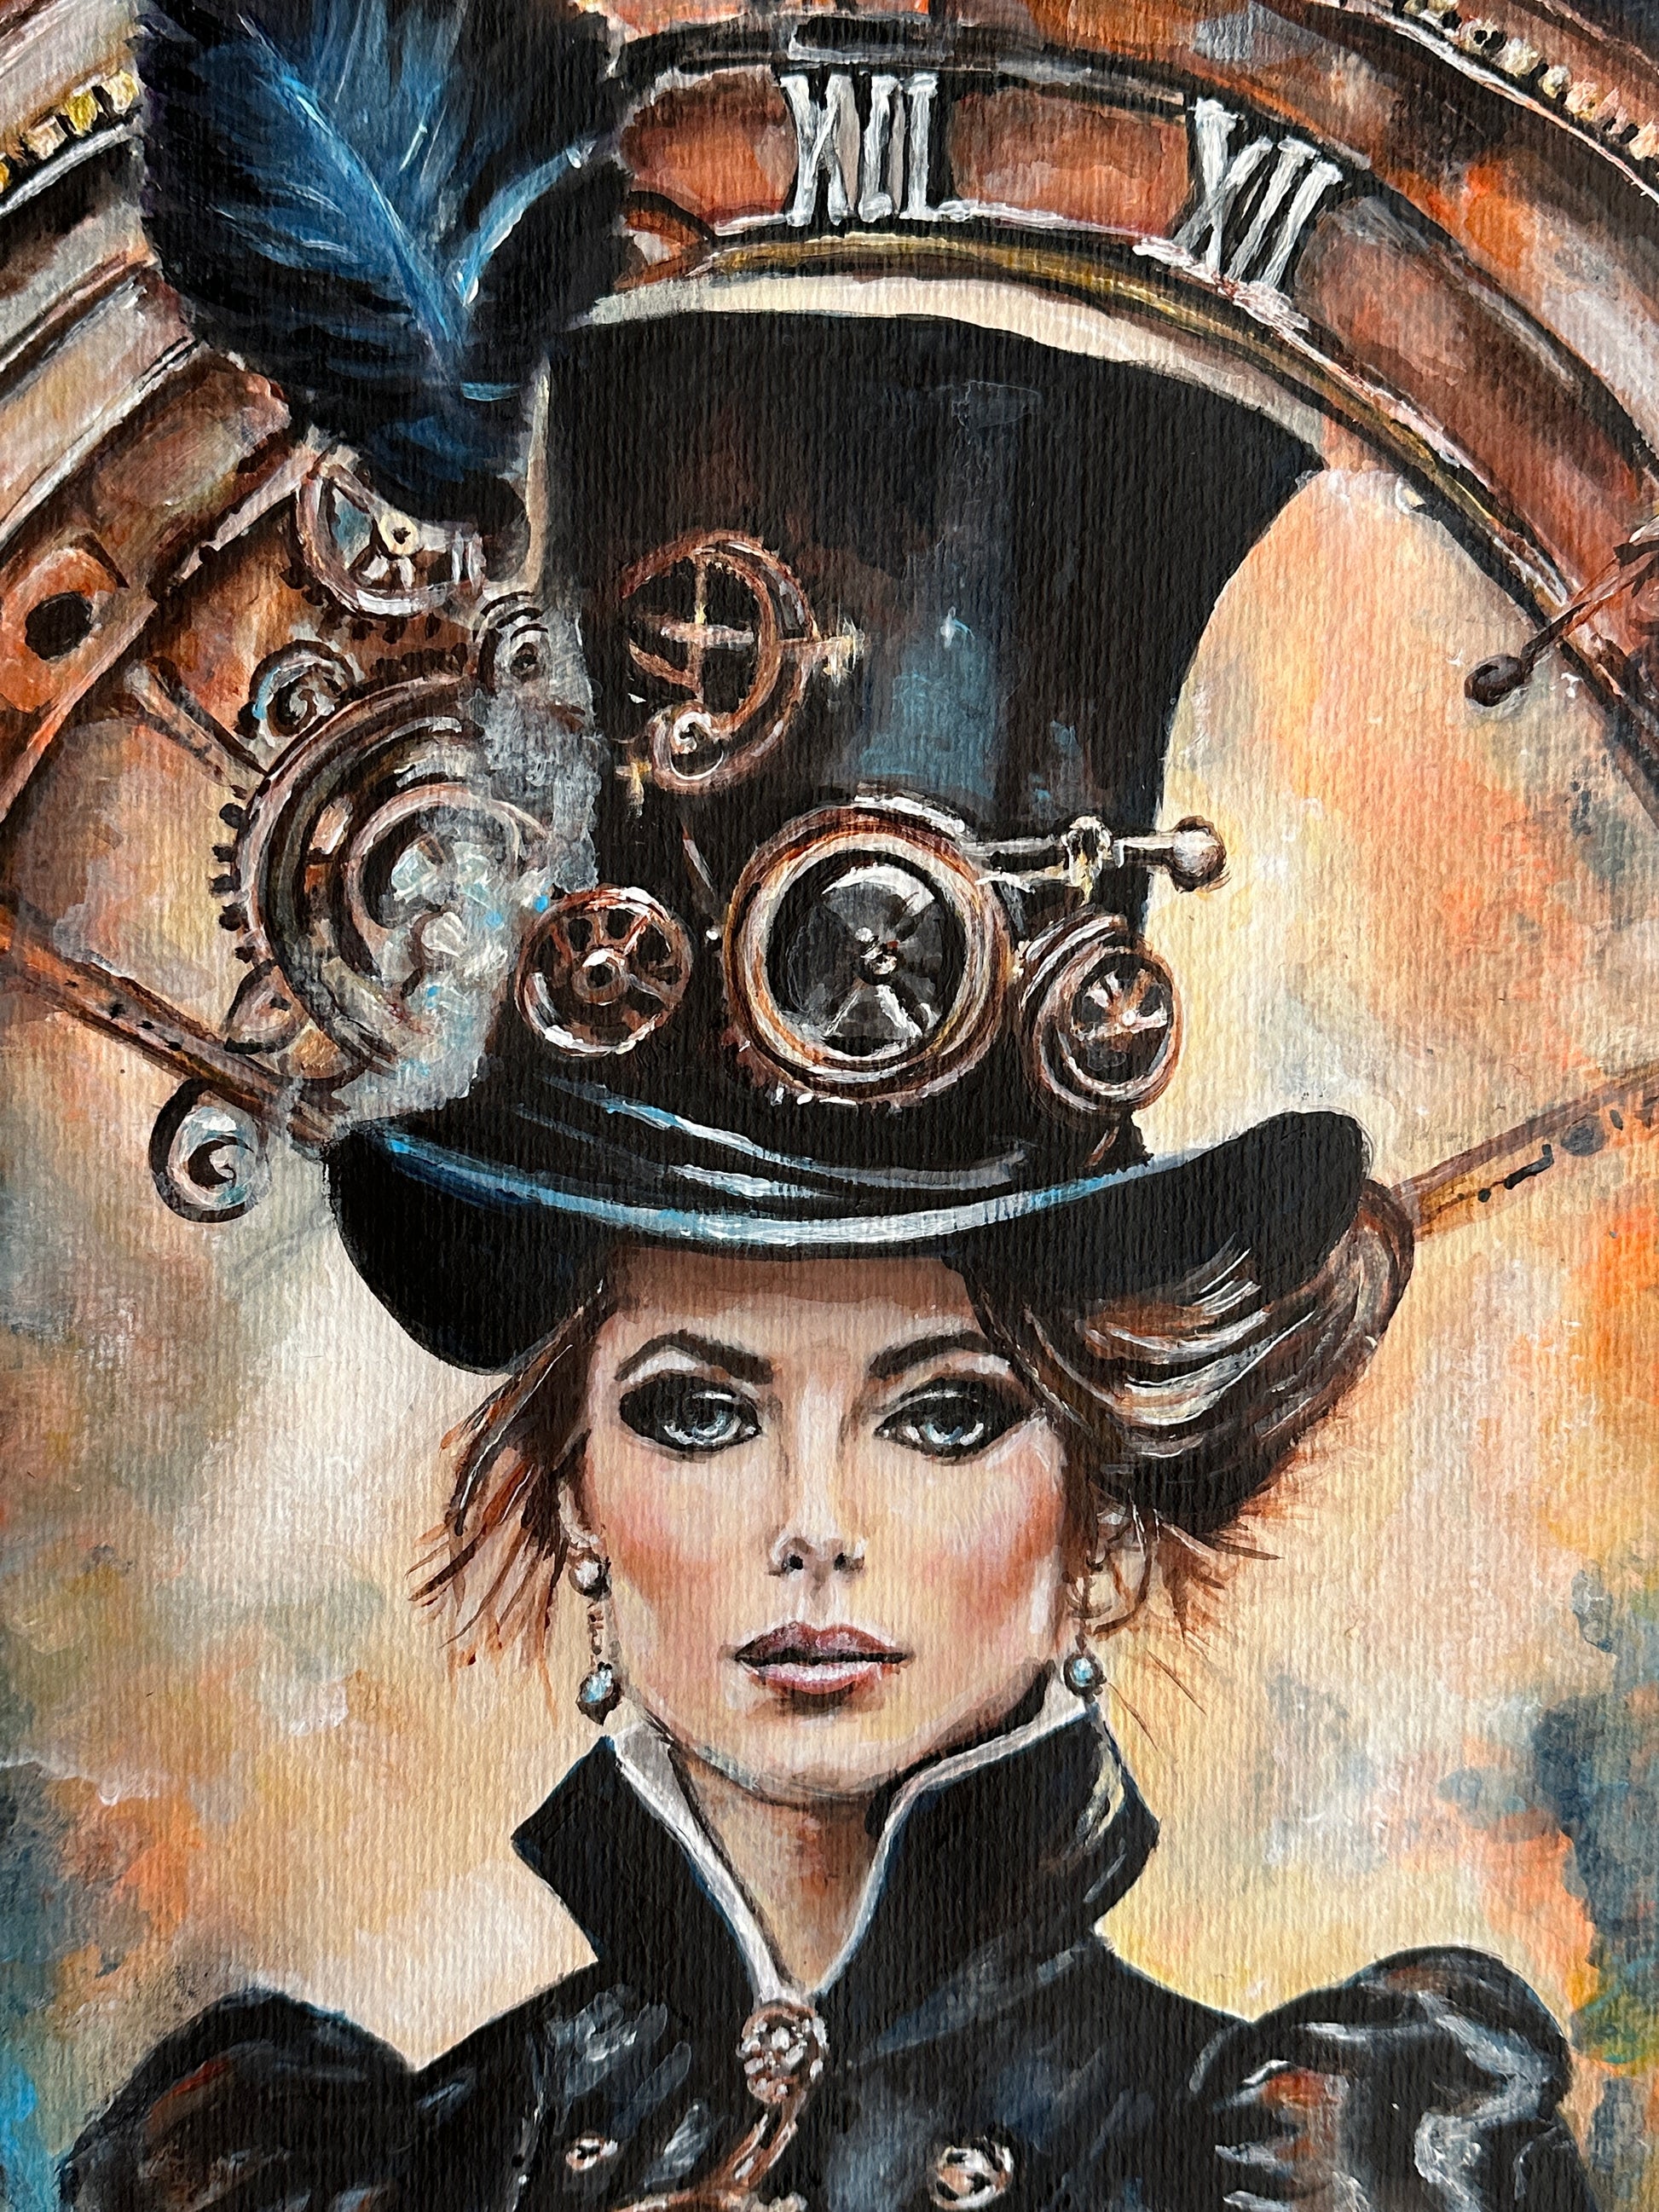 Steampunk Lady: Timeless portrayal of innovation and progress in a steampunk aesthetic.